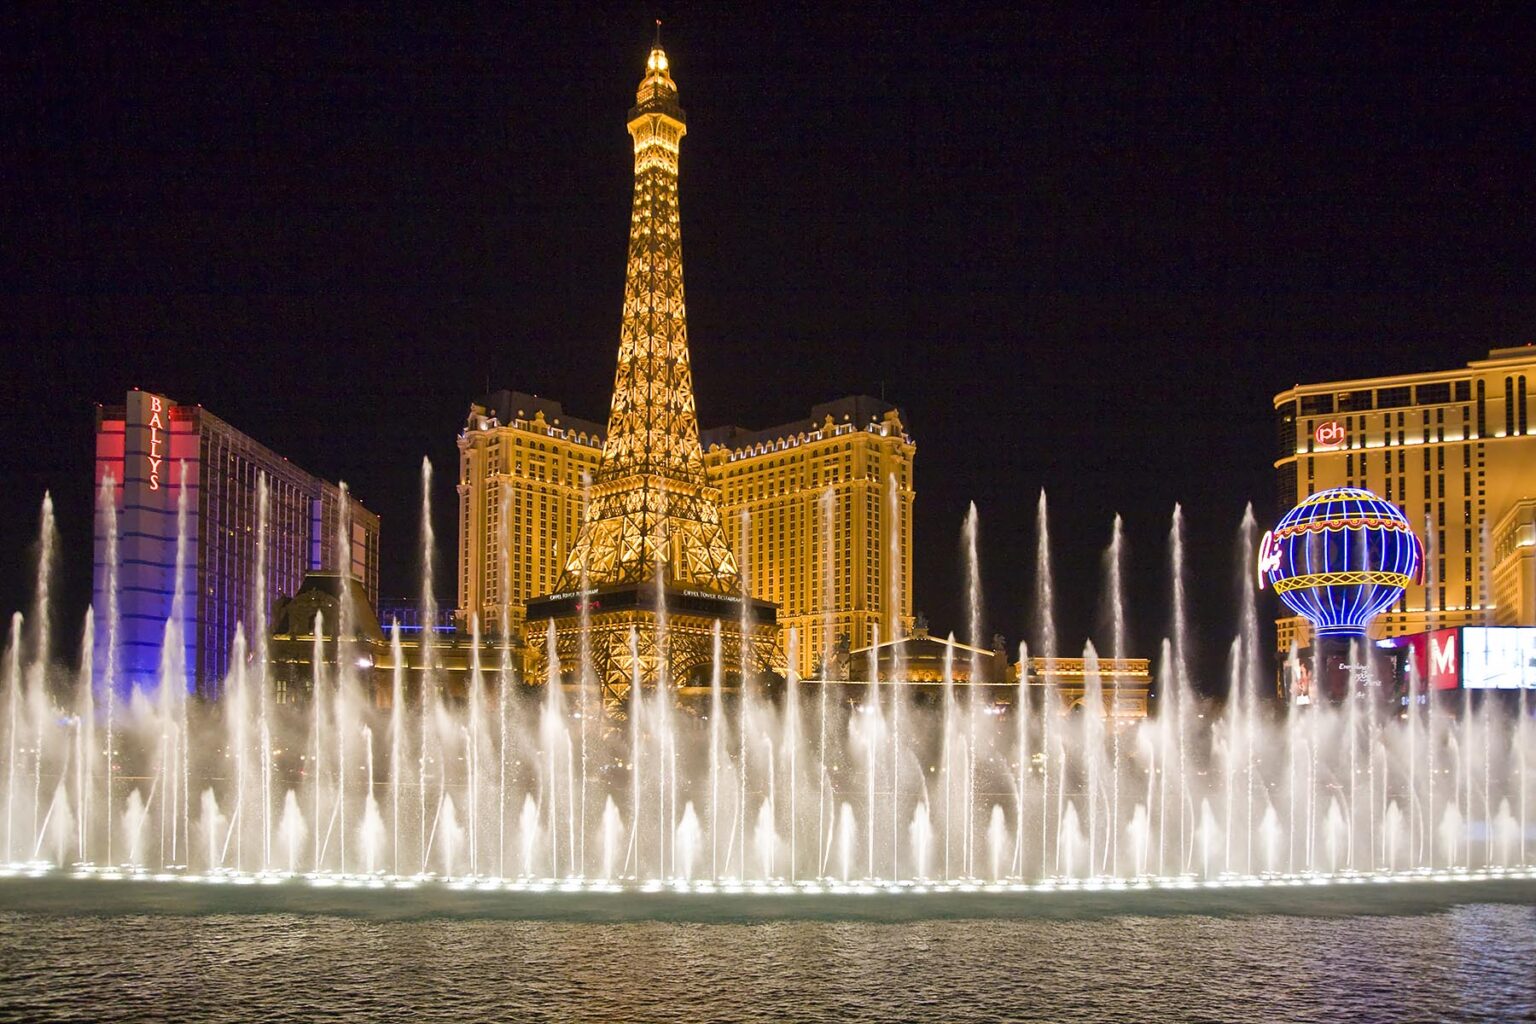 The evening FOUNTAIN SHOW at the BELLAGIO looking towards the PARIS HOTEL AND CASINO - LAS VEGAS, NEVADA